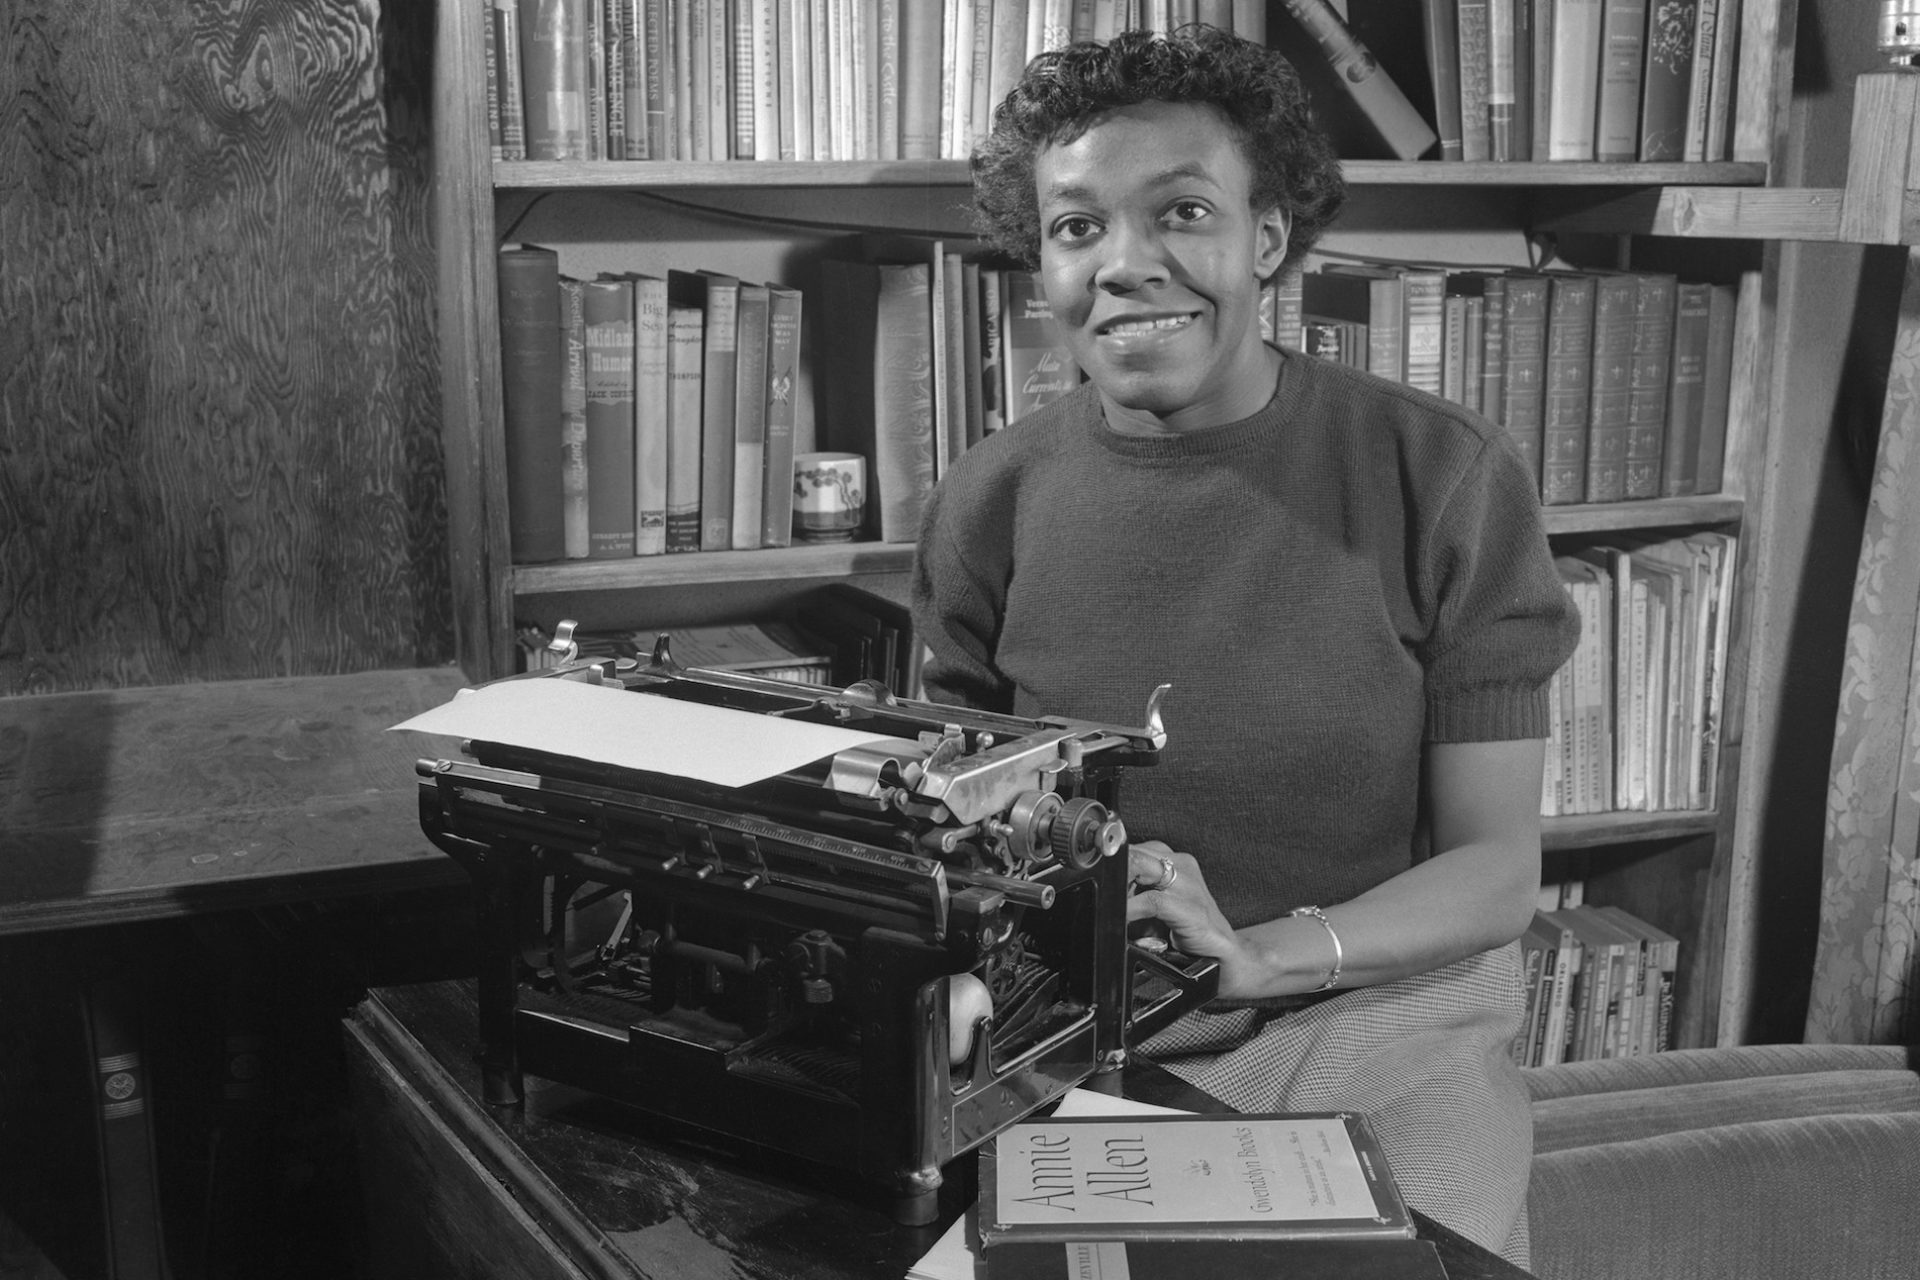 A black and white photograph of a Black woman with short hair, seated behind a typewriter. There is a bookshelf behind her.